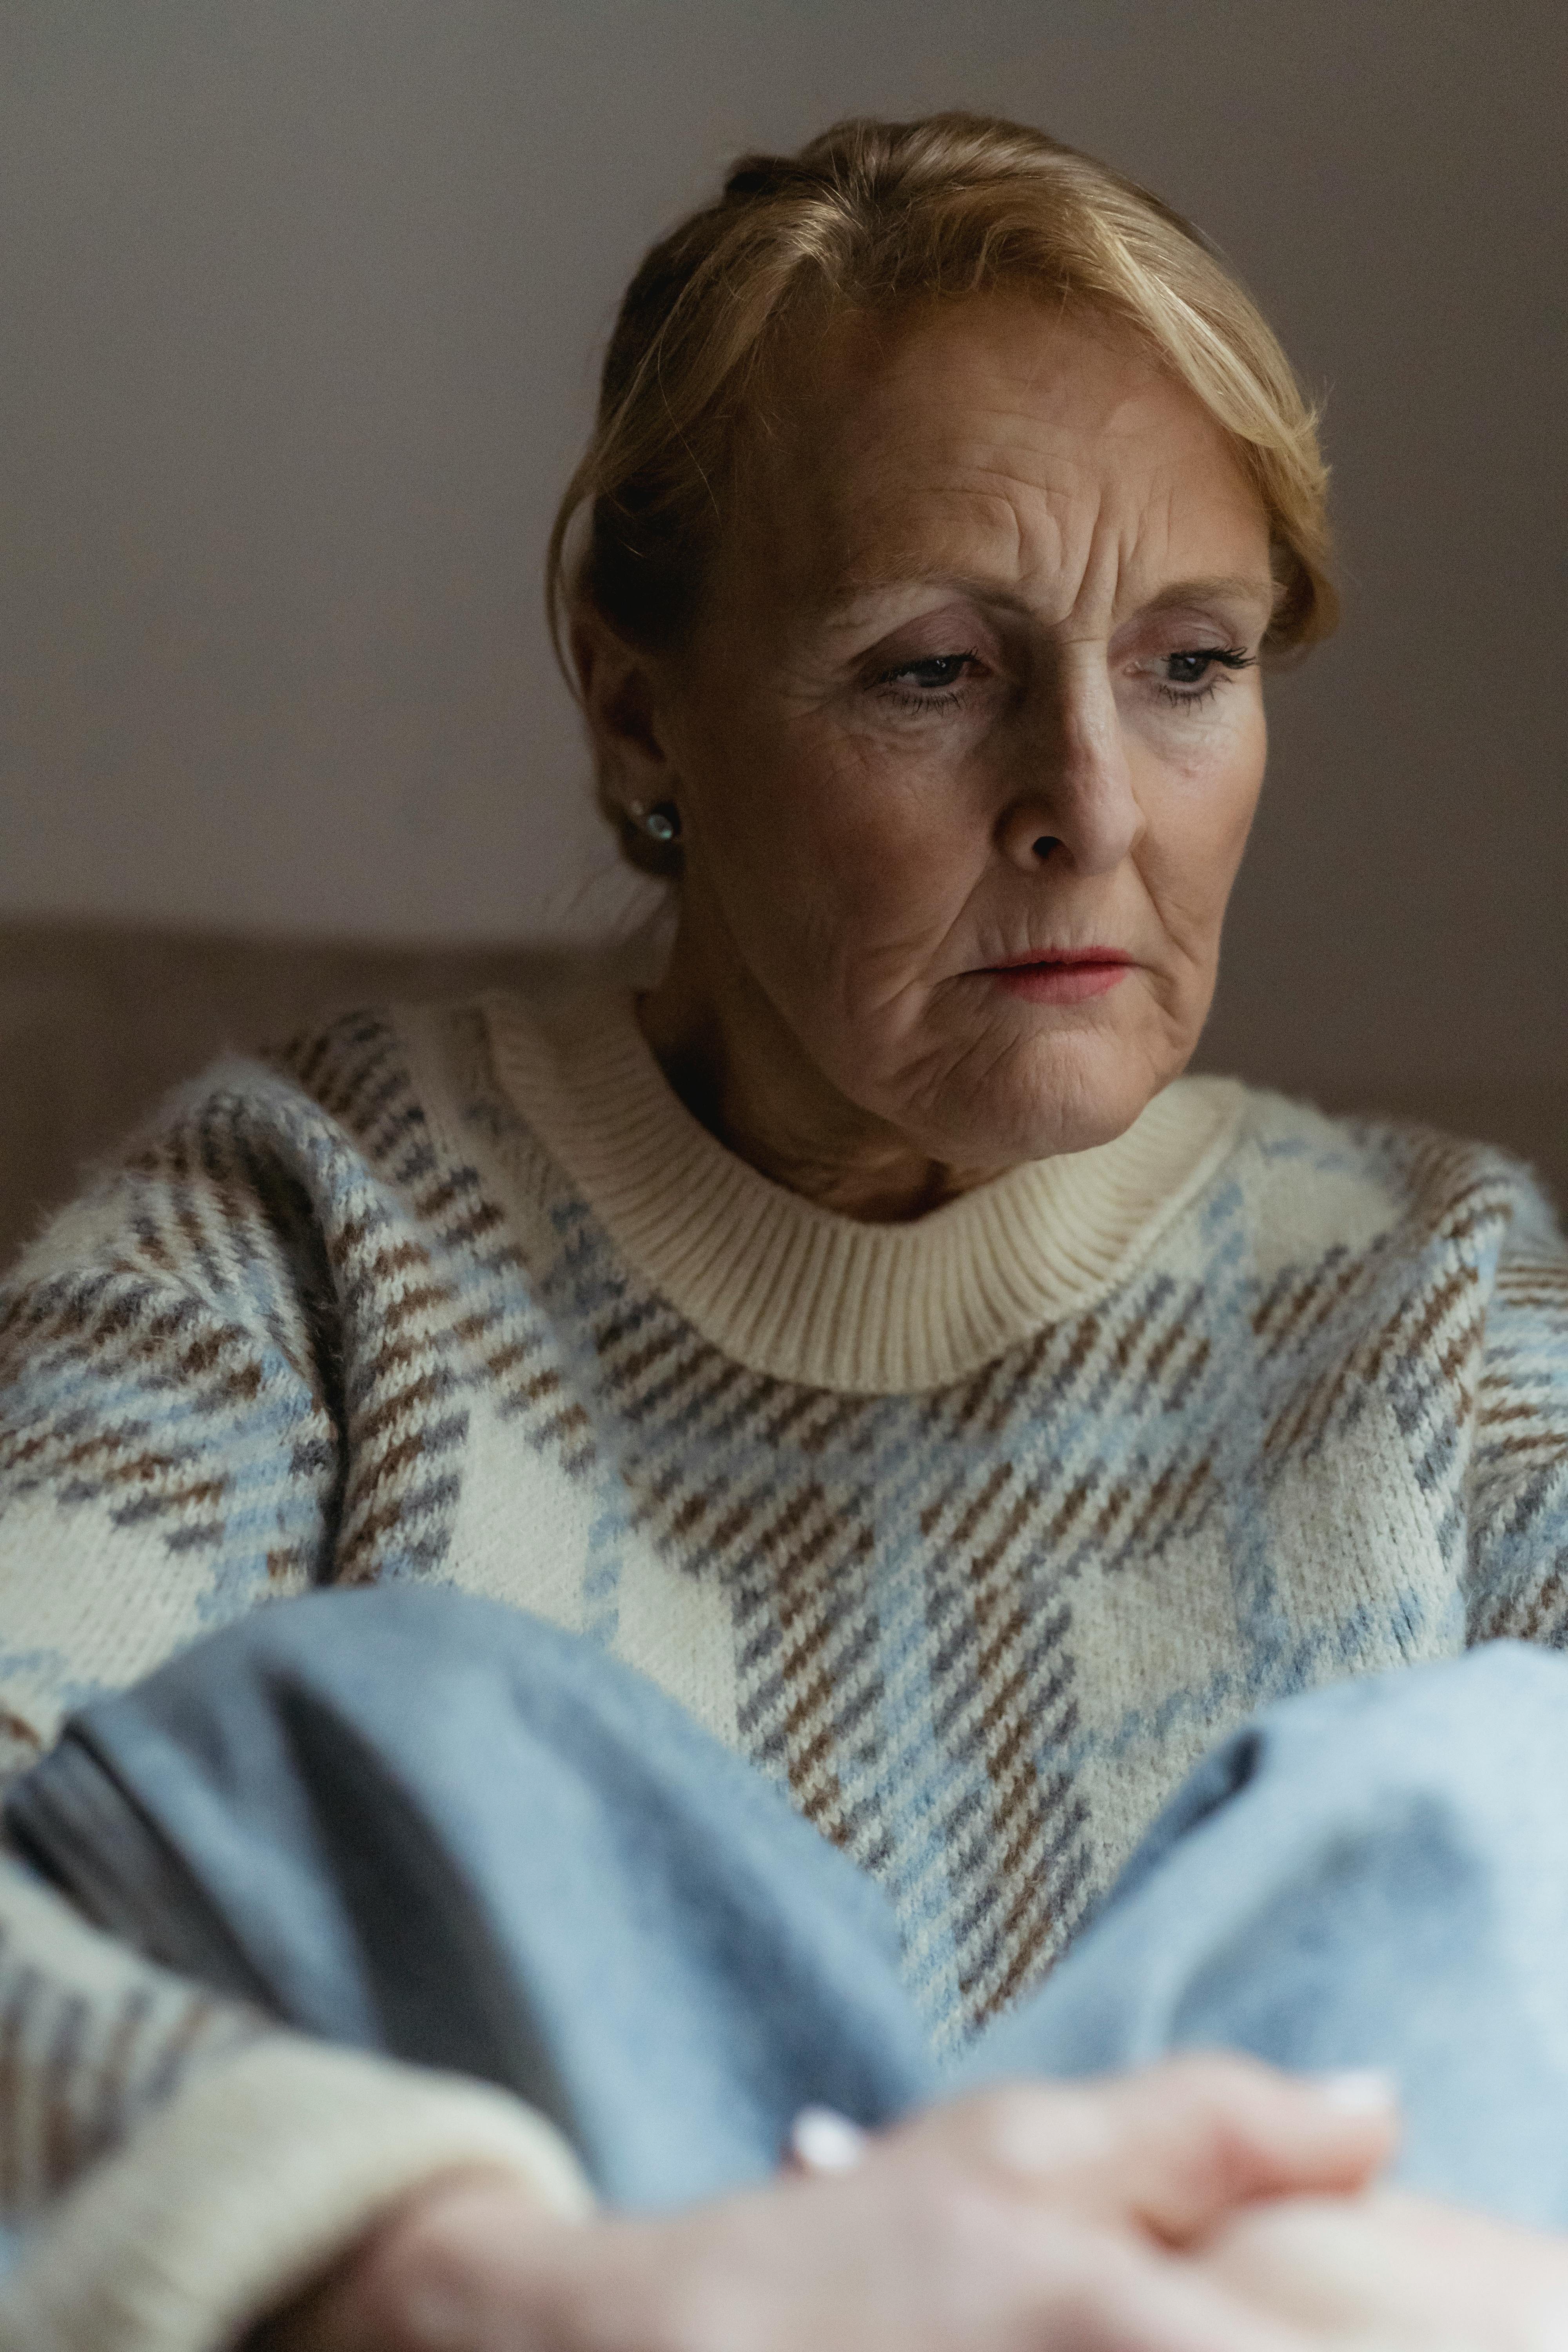 An upset older woman looking down and to the side | Source: Pexels